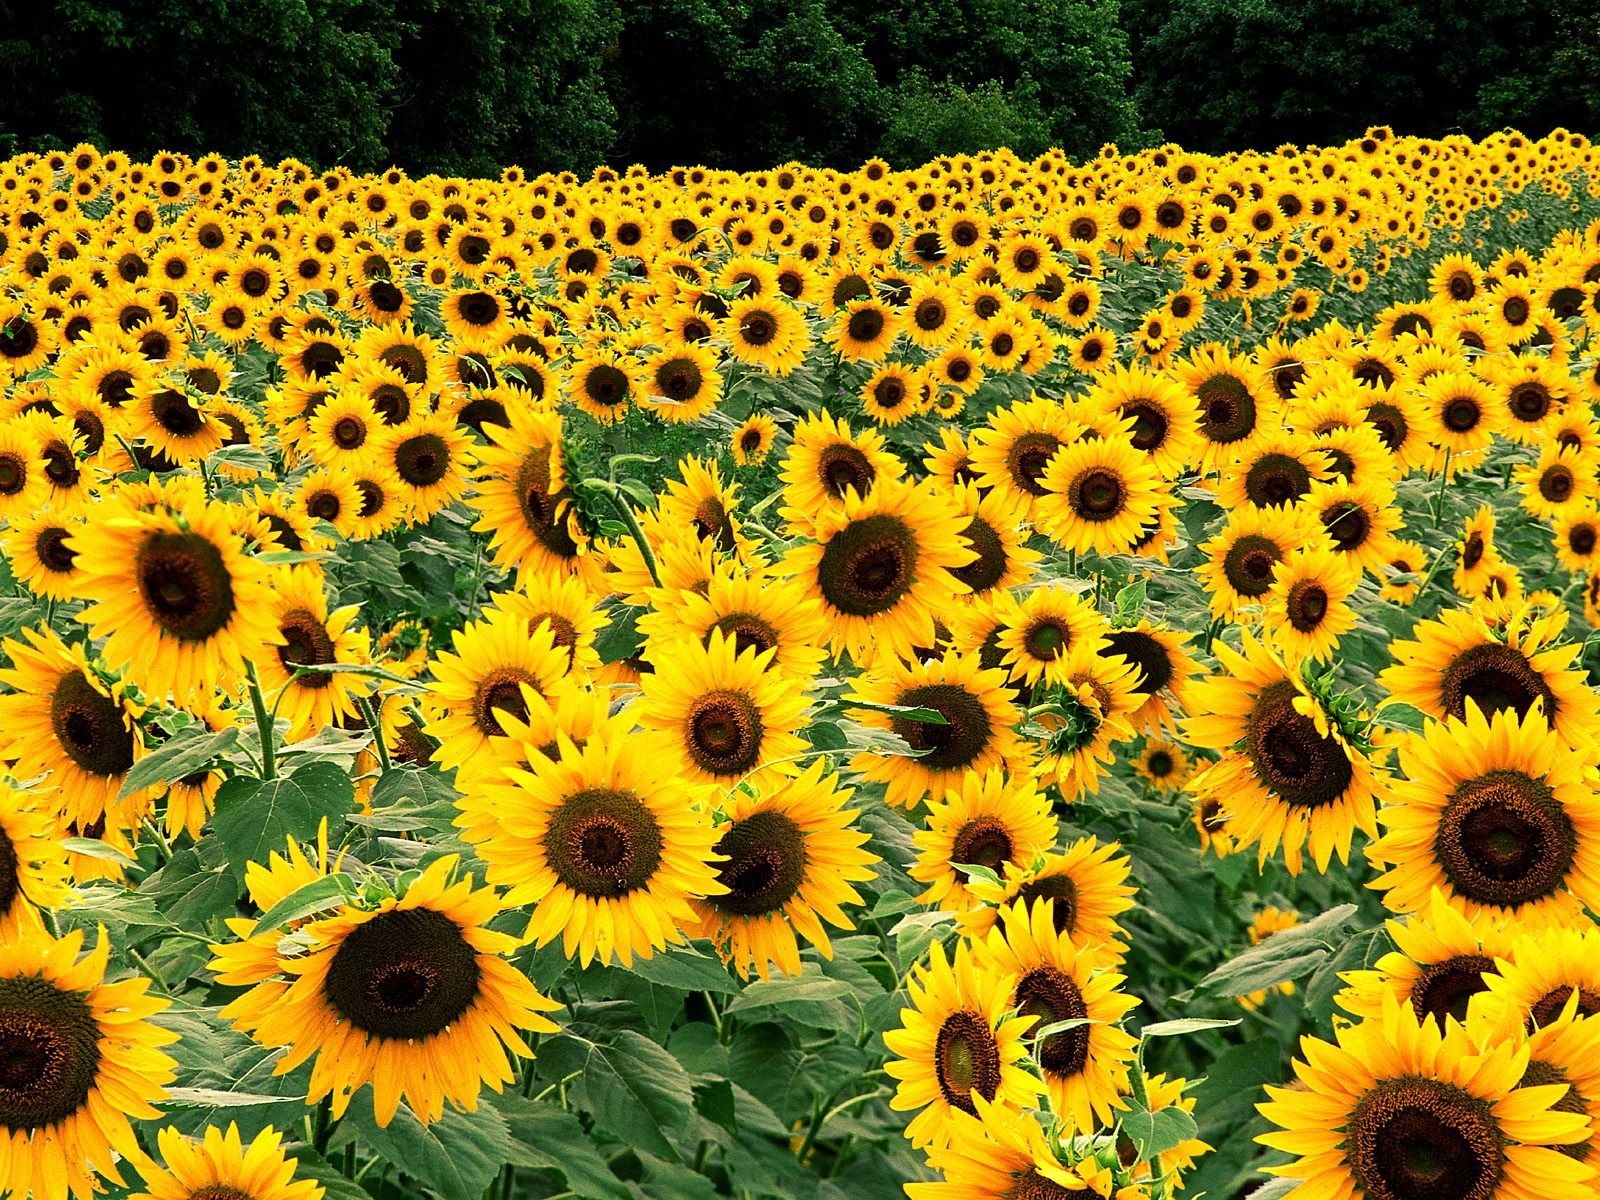 View Over Sunflowers Field | Photo and Desktop Wallpaper